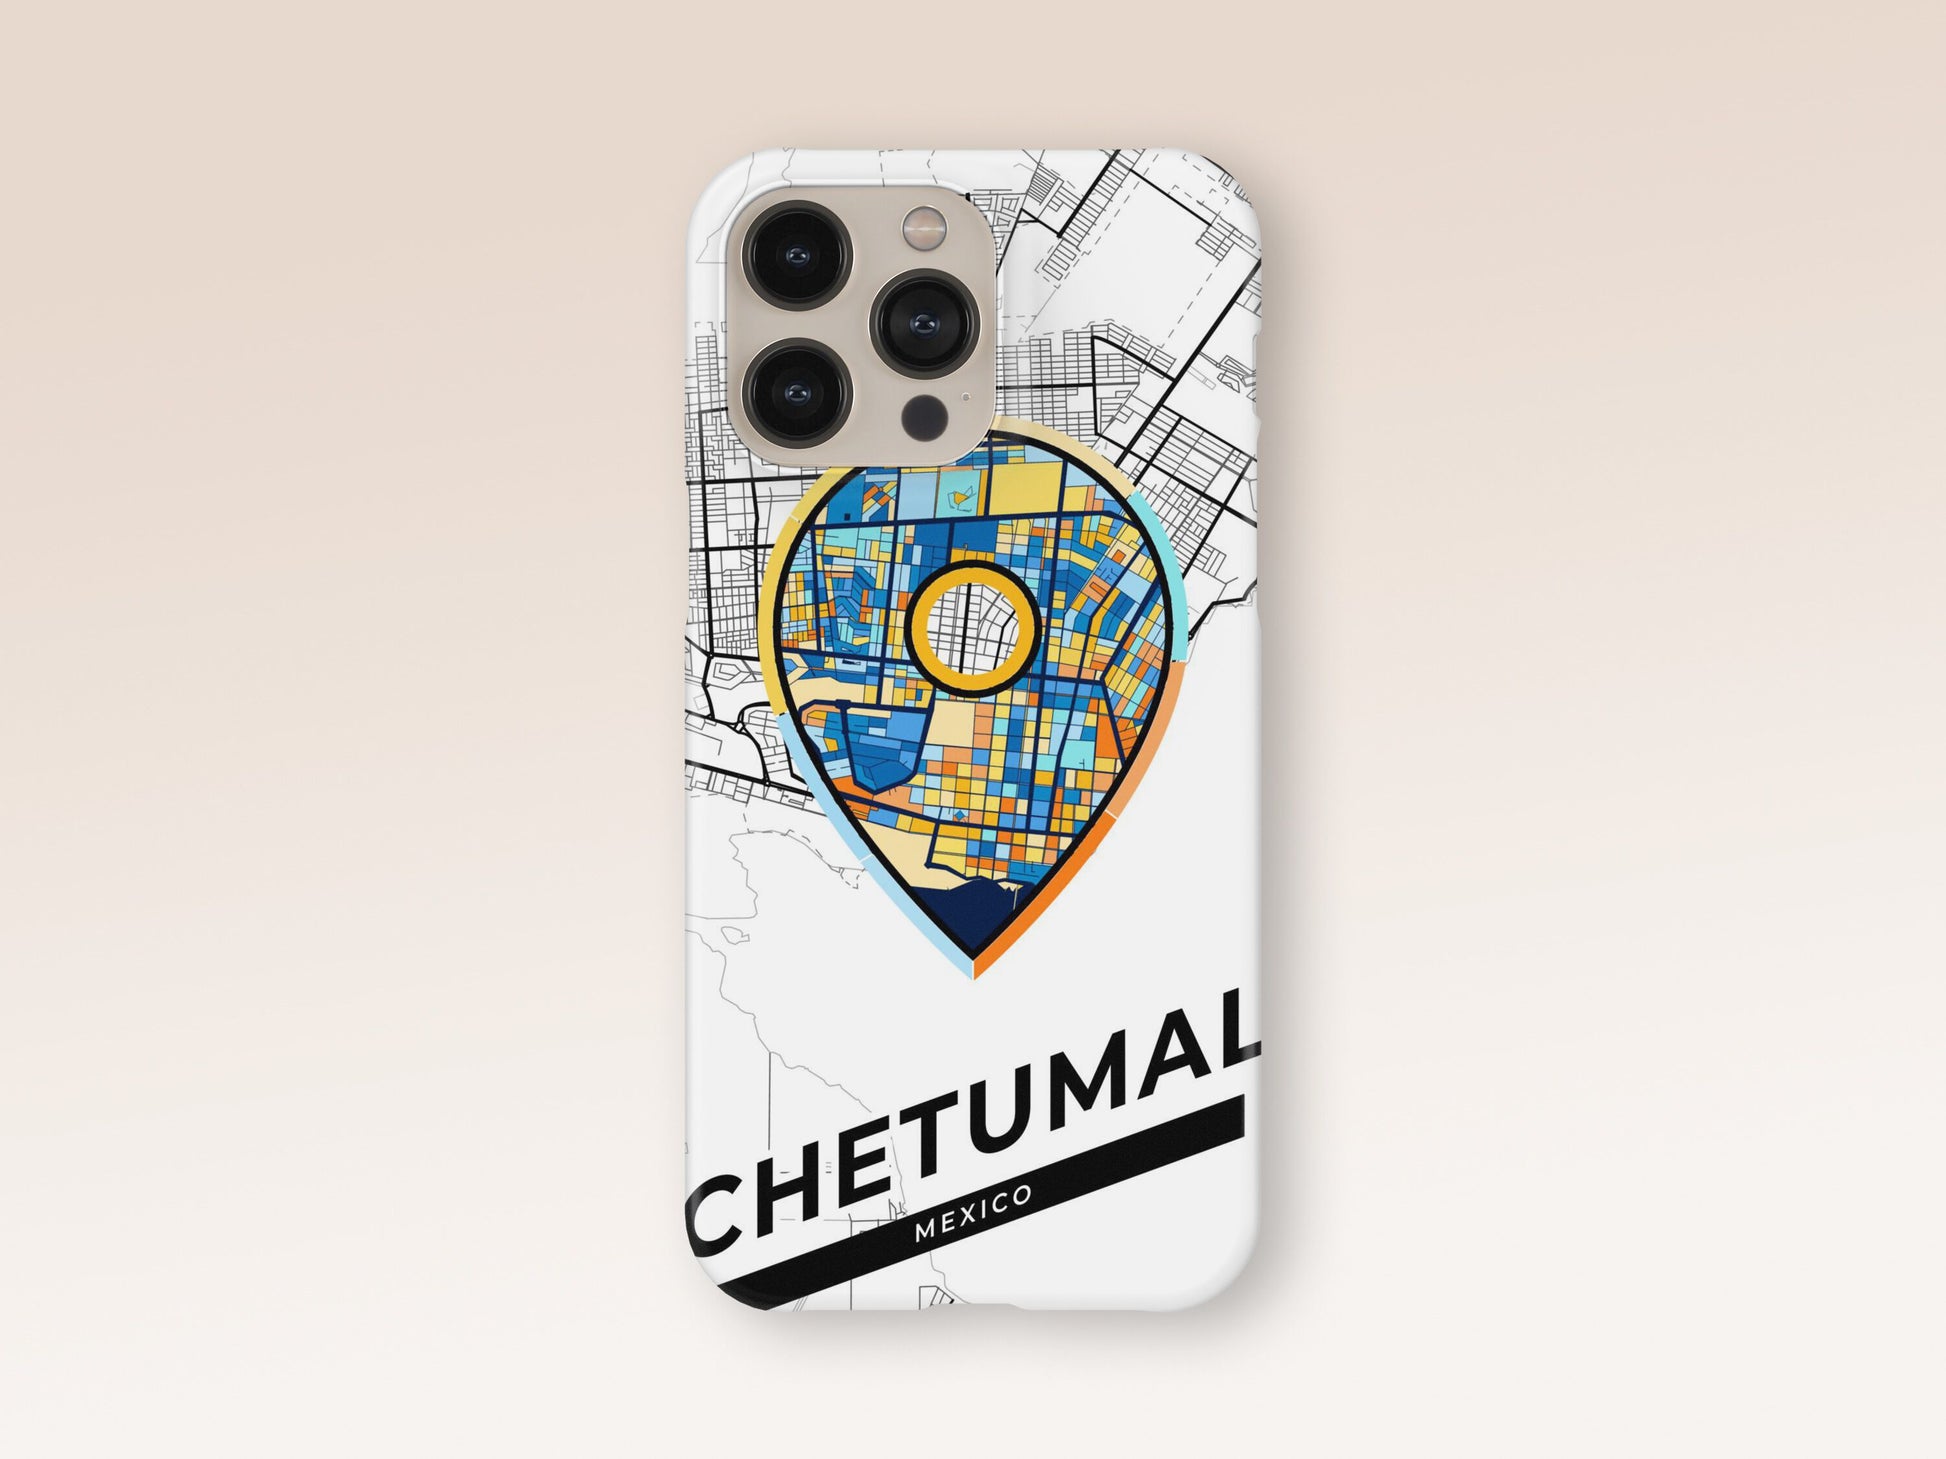 Chetumal Mexico slim phone case with colorful icon. Birthday, wedding or housewarming gift. Couple match cases. 1